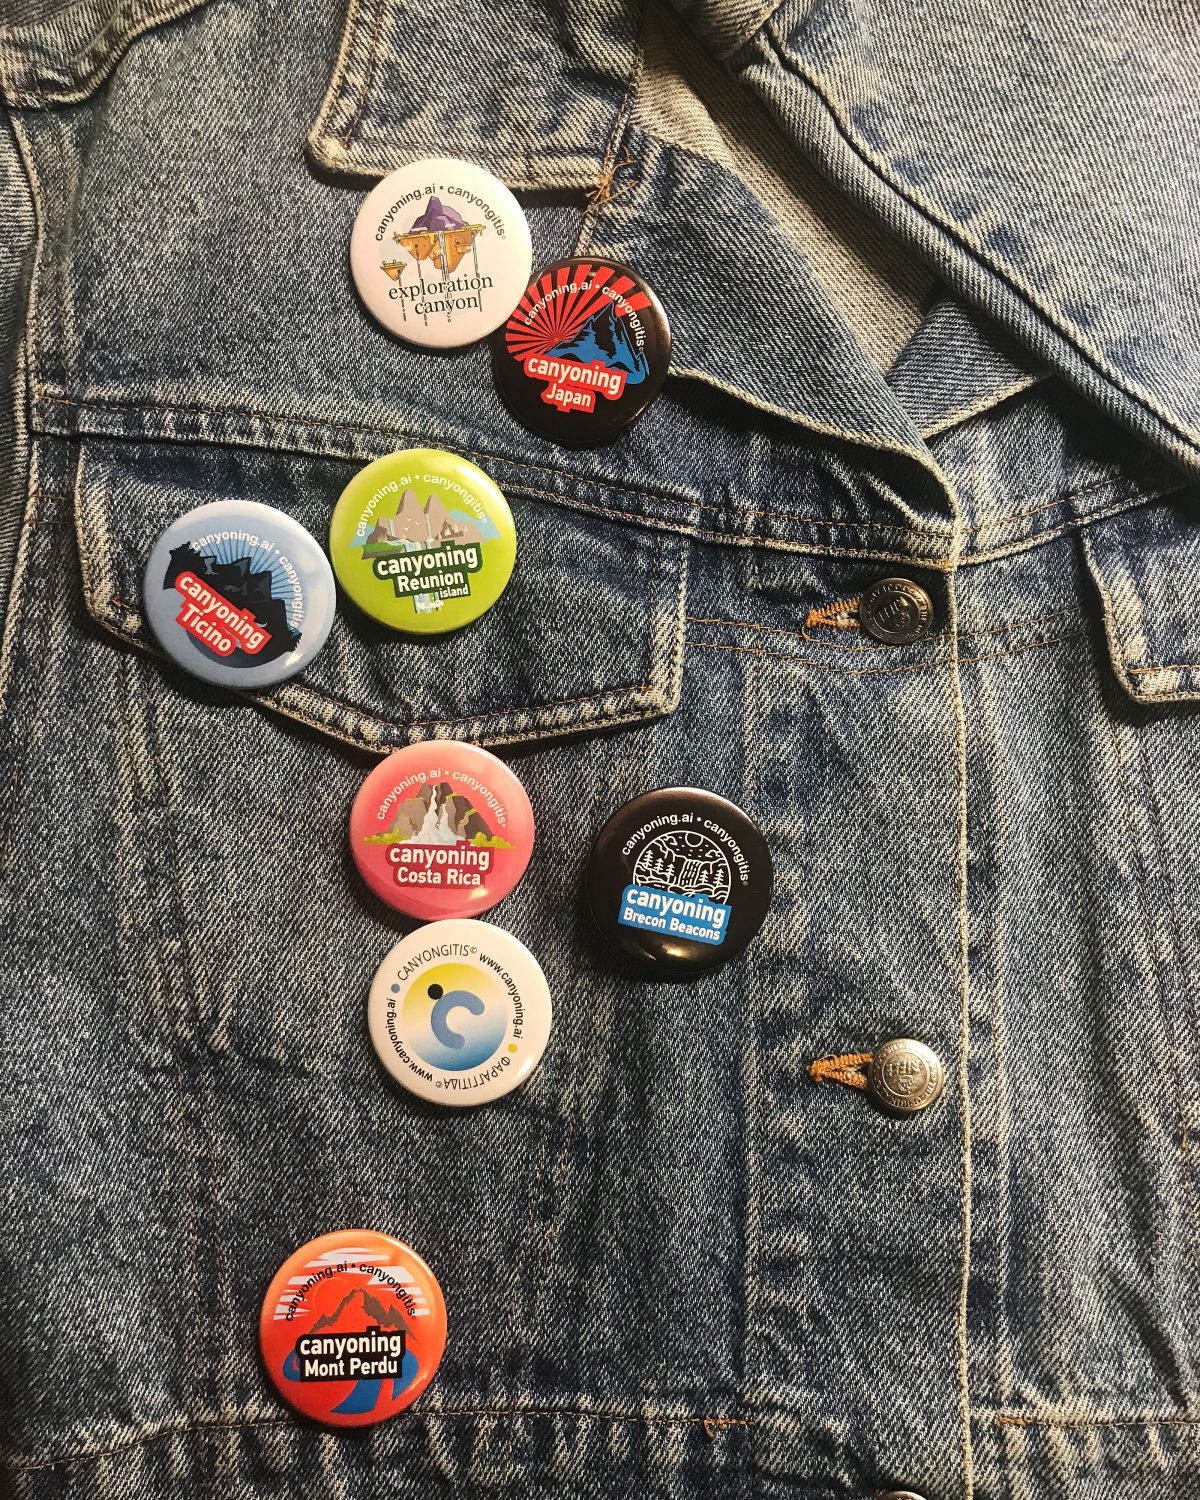 Canyoning badges pinned on a jean jacket